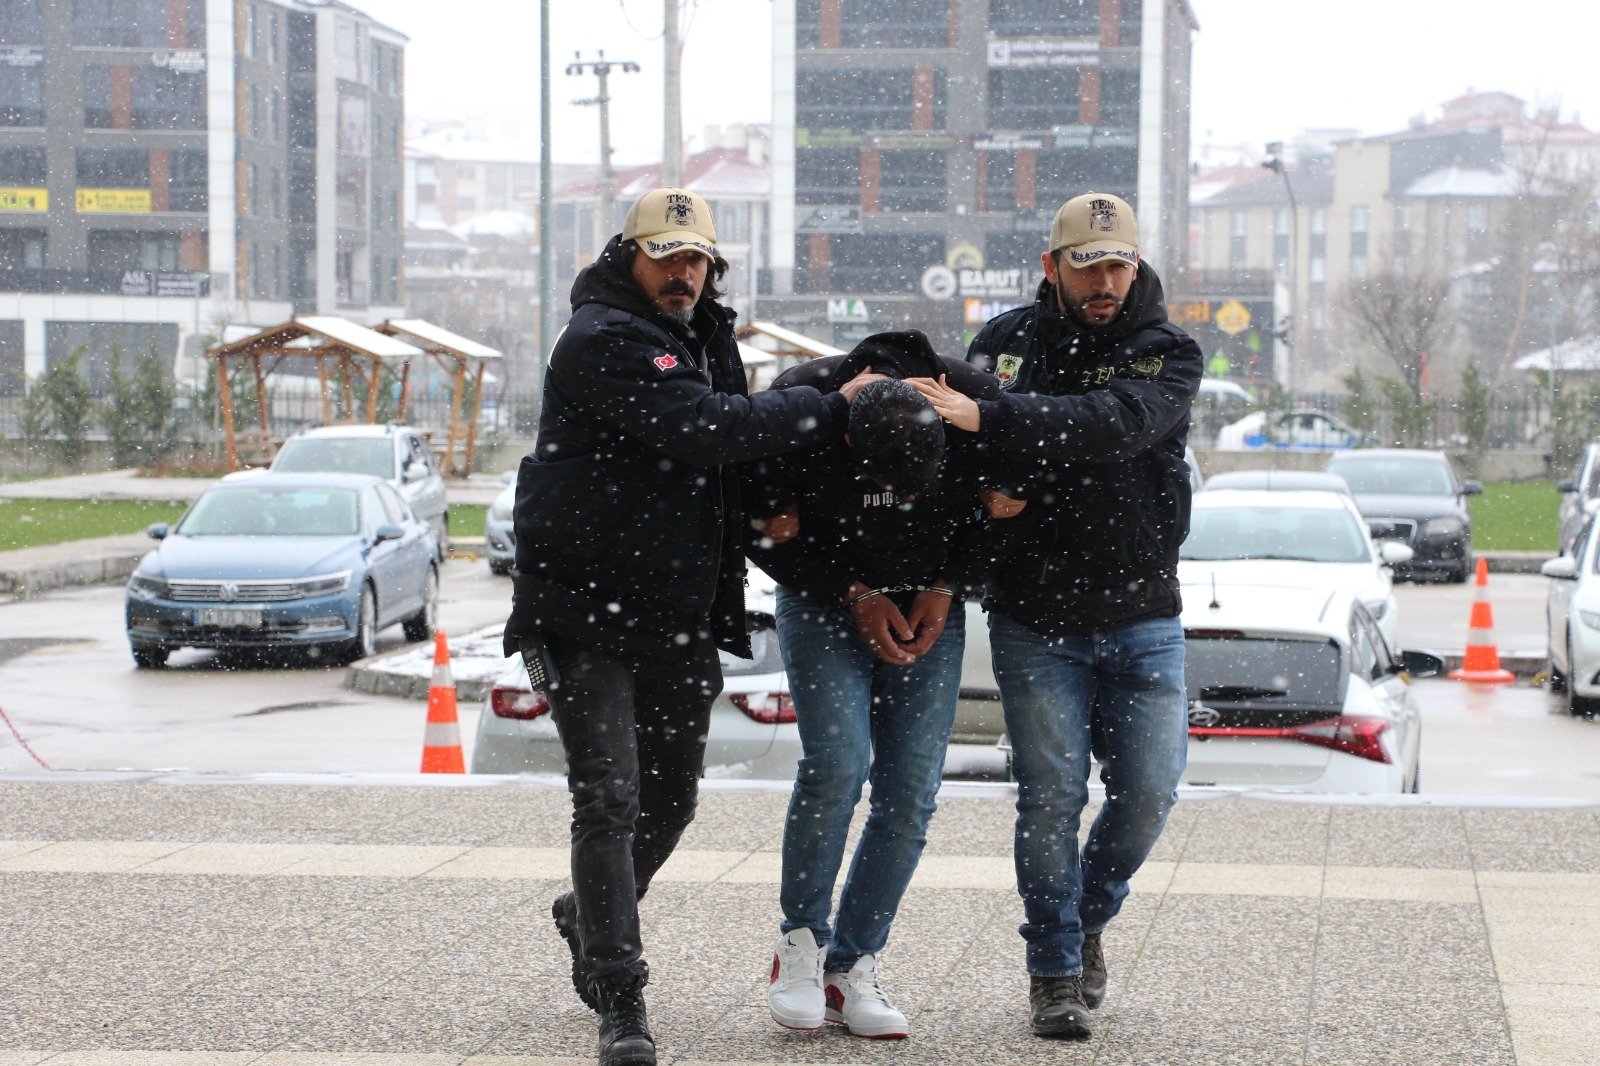 Police officers escort a Syrian national identified by his initials K.B. to the courthouse after his arrest for suspected links to the Daesh terror group, northwestern Bolu province, Türkiye, March 30, 2023. (DHA Photo)